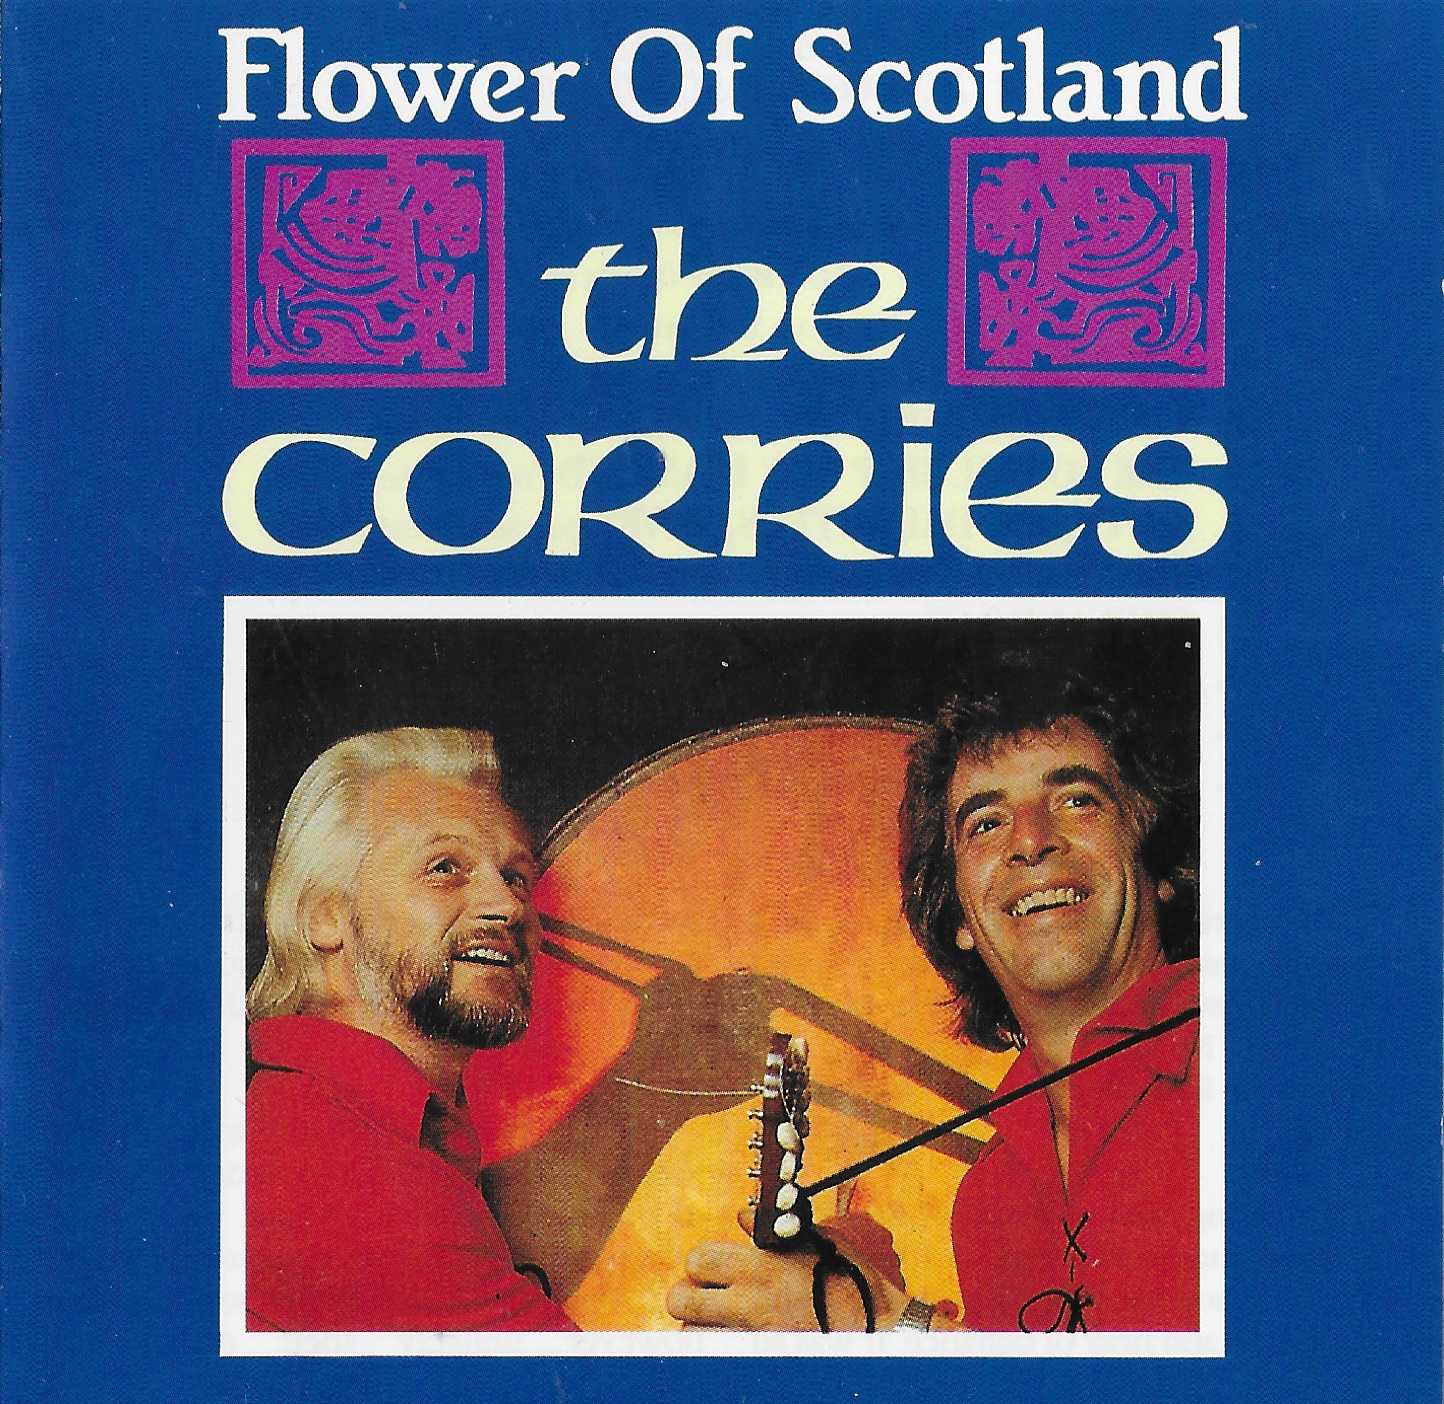 Picture of BBCCD820 Flowers of Scotland - The Corries by artist The Corries from the BBC cds - Records and Tapes library